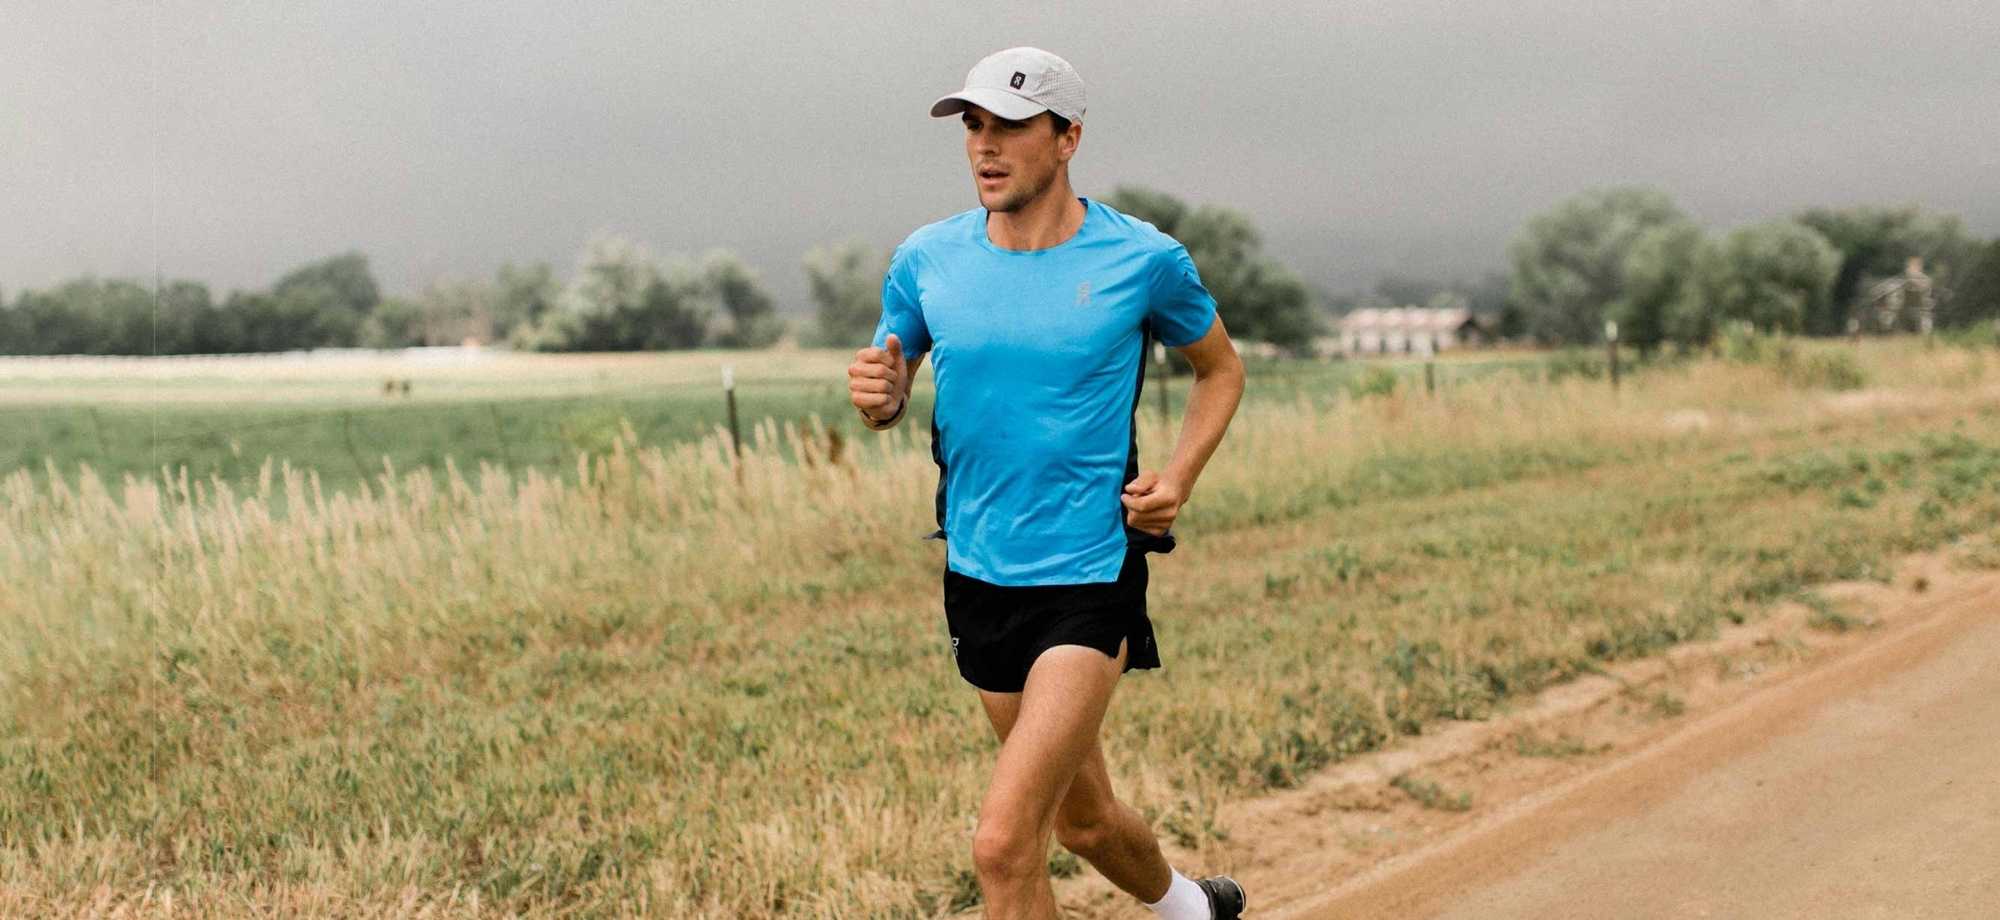 Olympic Distance Runner Joe Klecker on Training and Preparing with Purpose